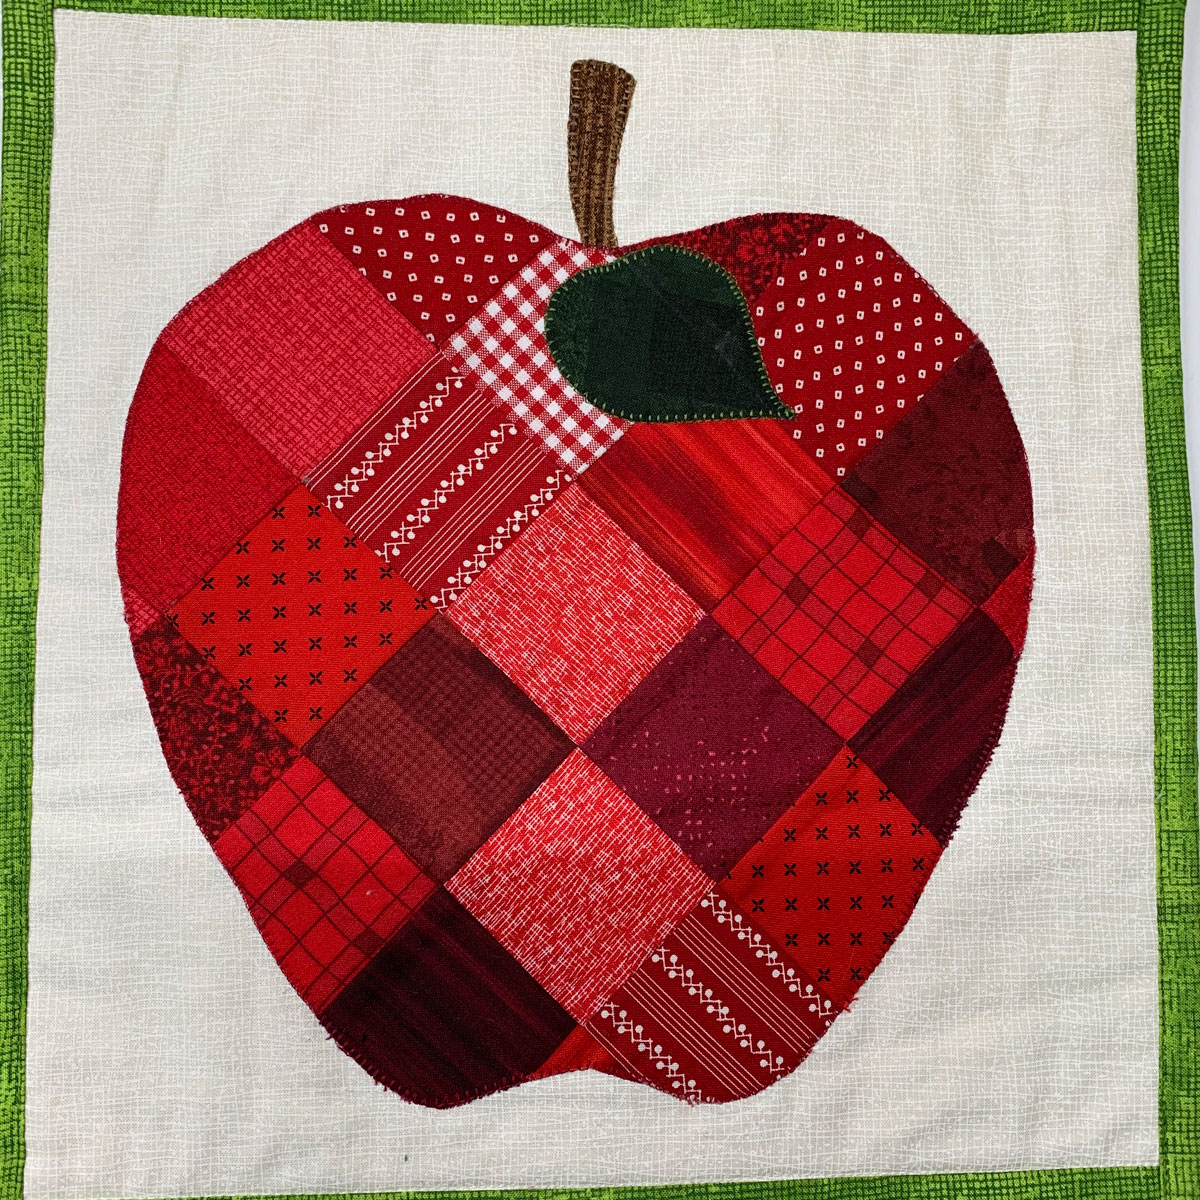 Patchwork Apples Table Runner Pattern